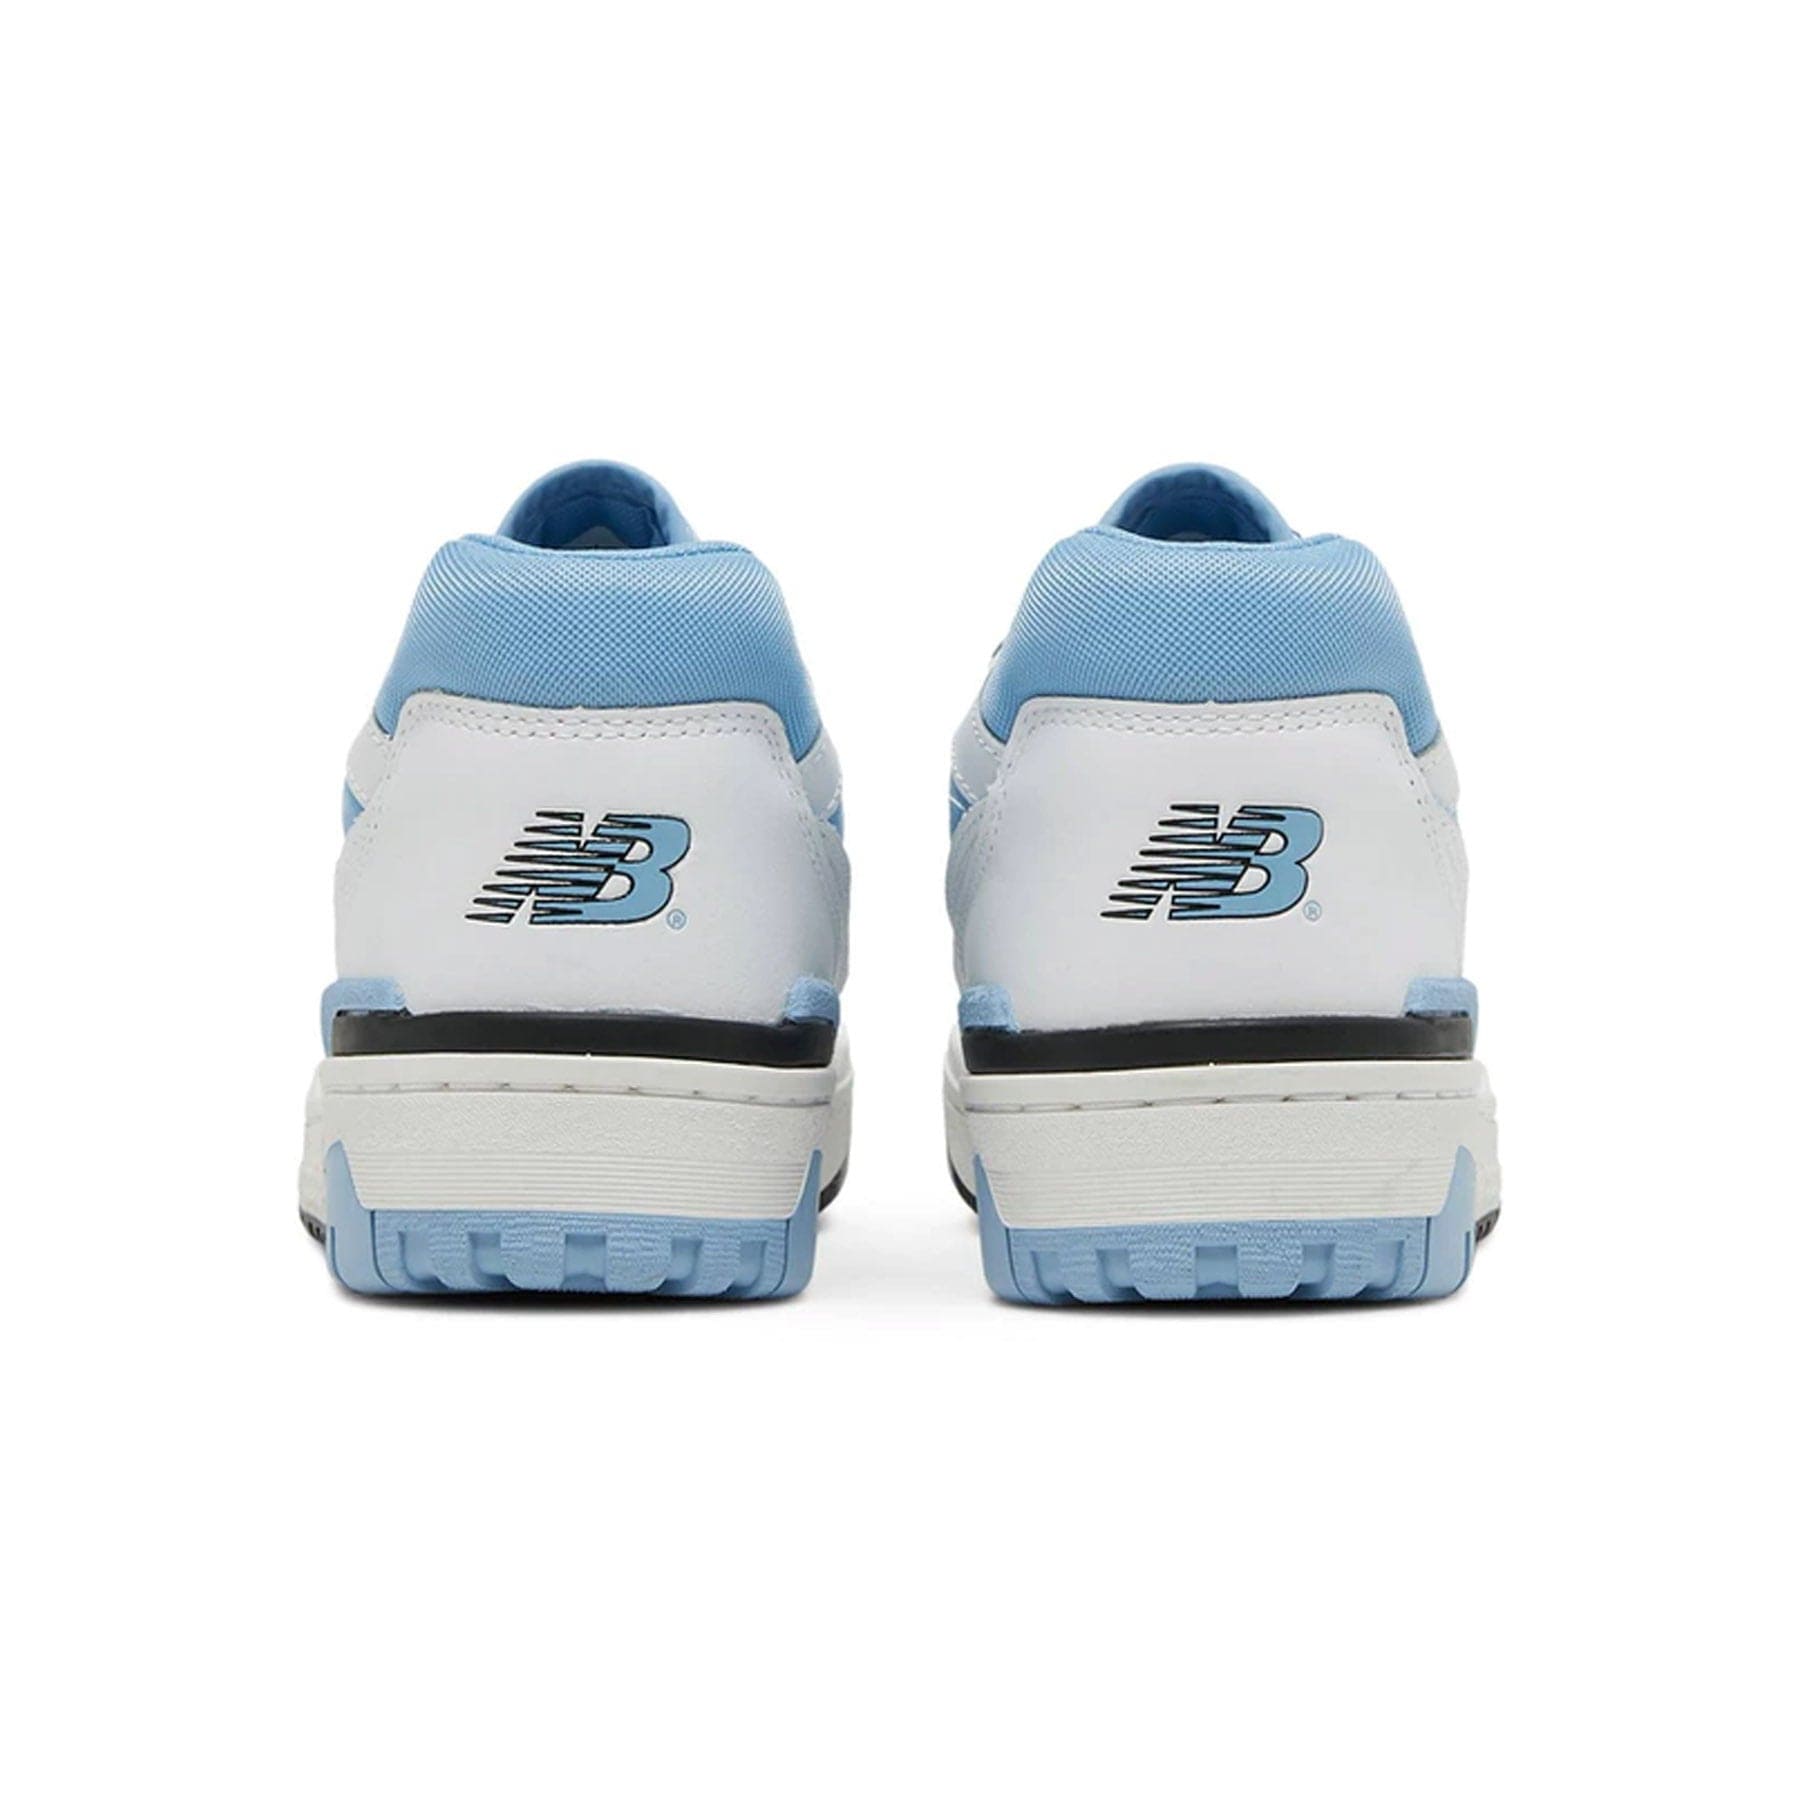 Double Boxed  349.99 New Balance 550 UNC Double Boxed